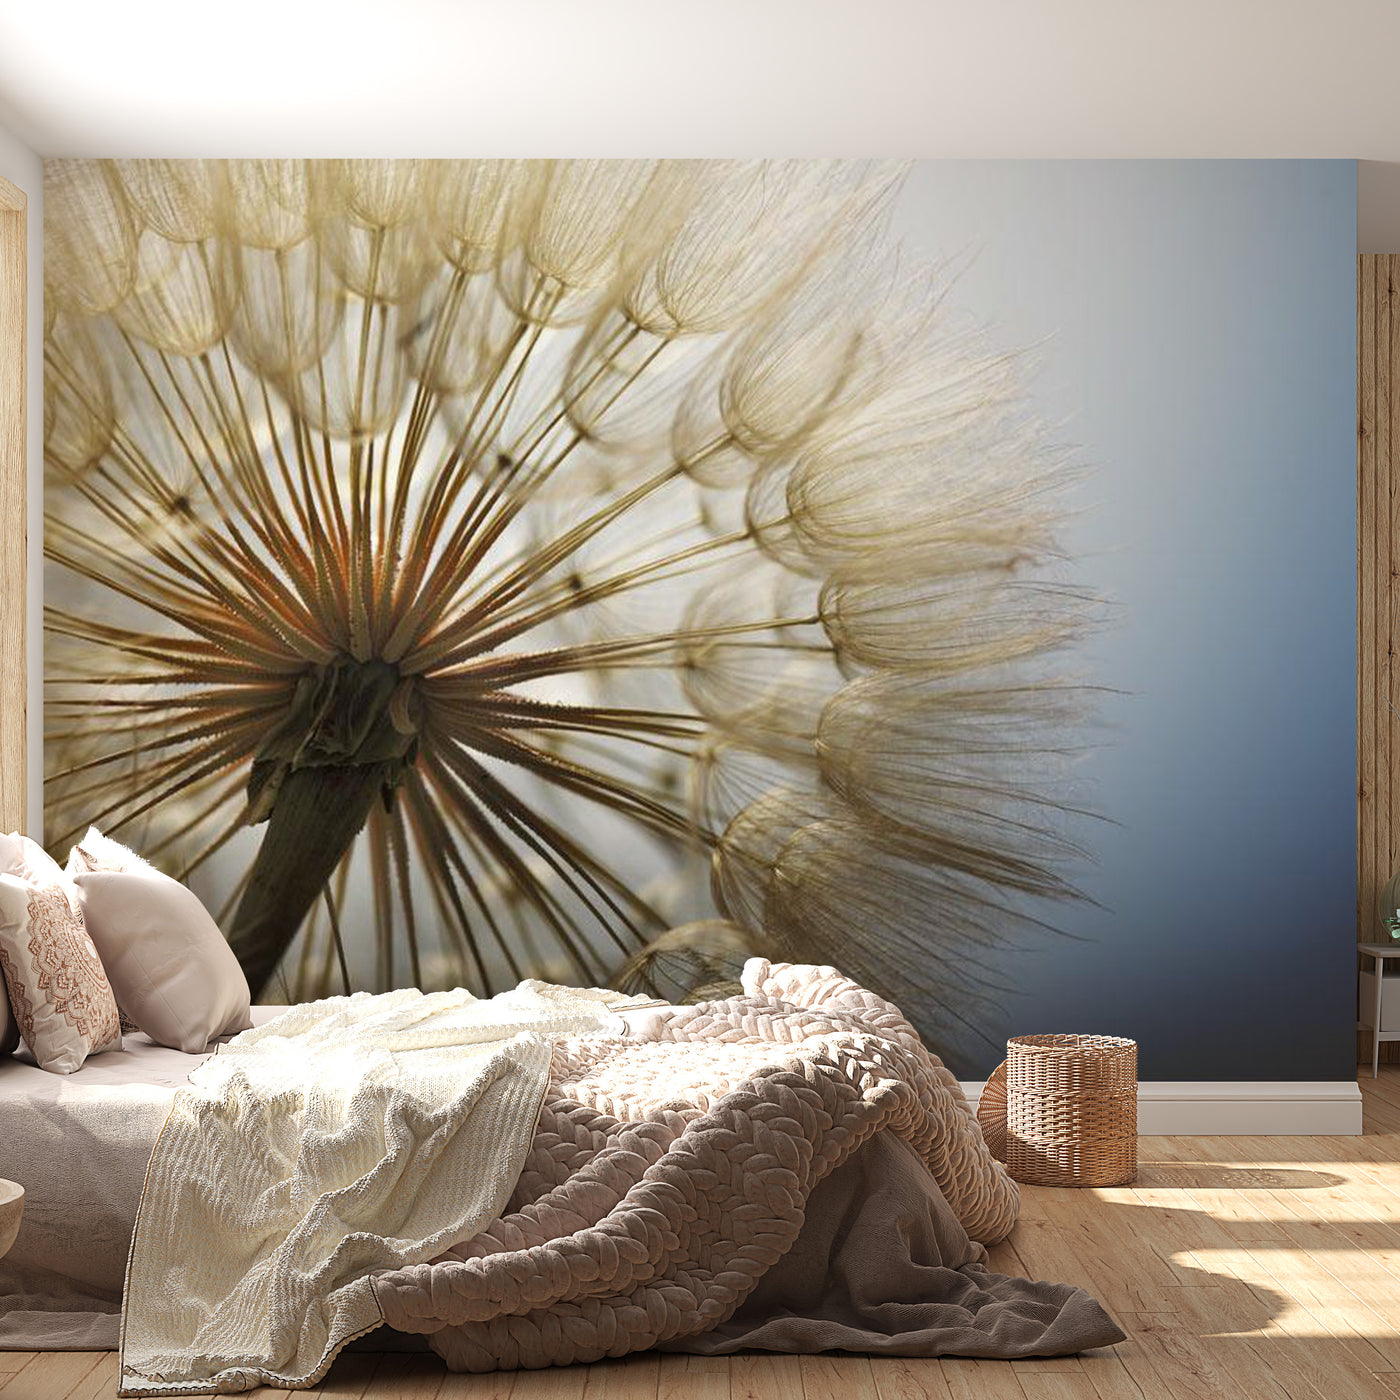 Peel & Stick Floral Wall Mural - Summer Delight Dandelion - Removable Wall Decals